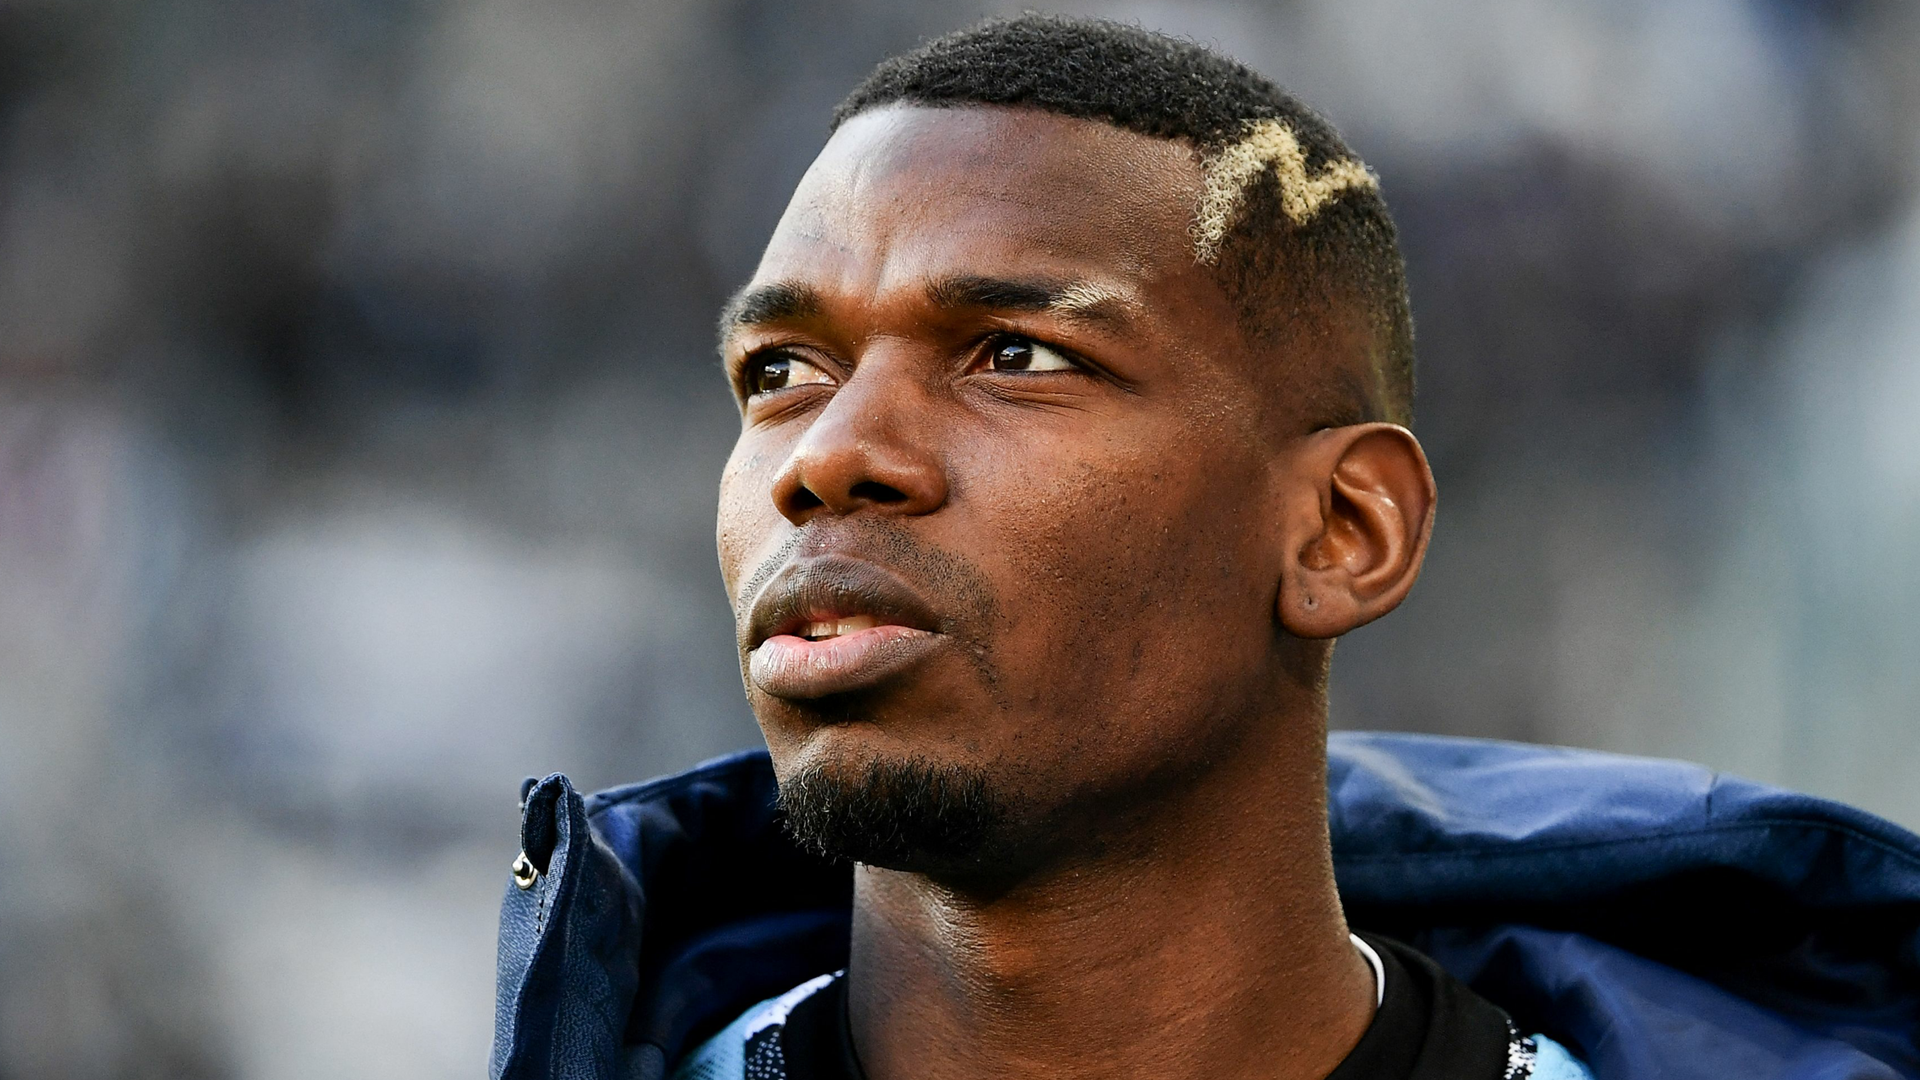 Paul Pogba DROPPED by Juventus for disciplinary reasons just two games into his comeback | Goal.com US